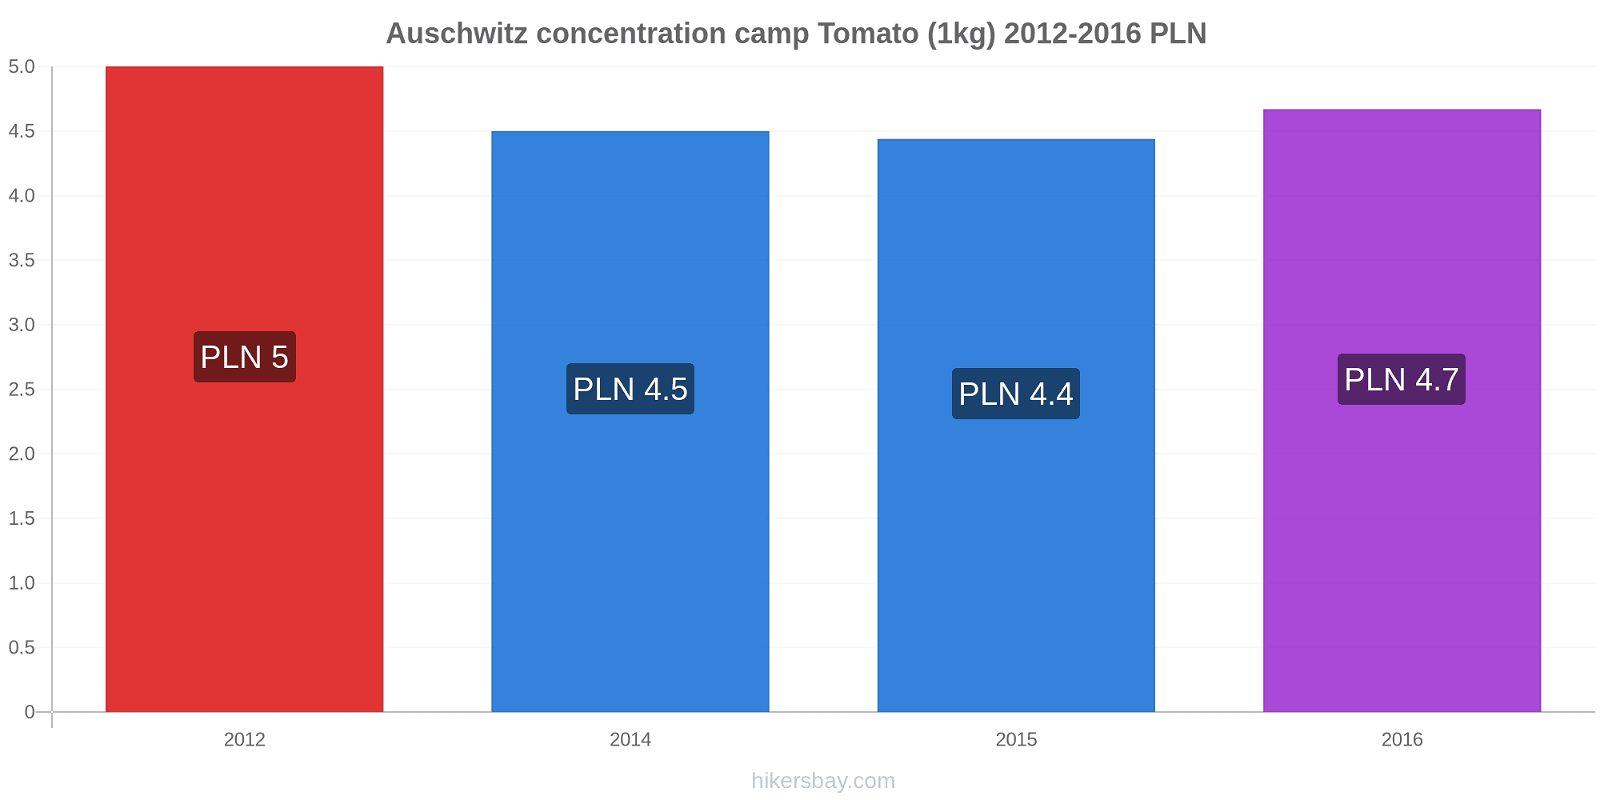 Auschwitz concentration camp price changes Tomato (1kg) hikersbay.com